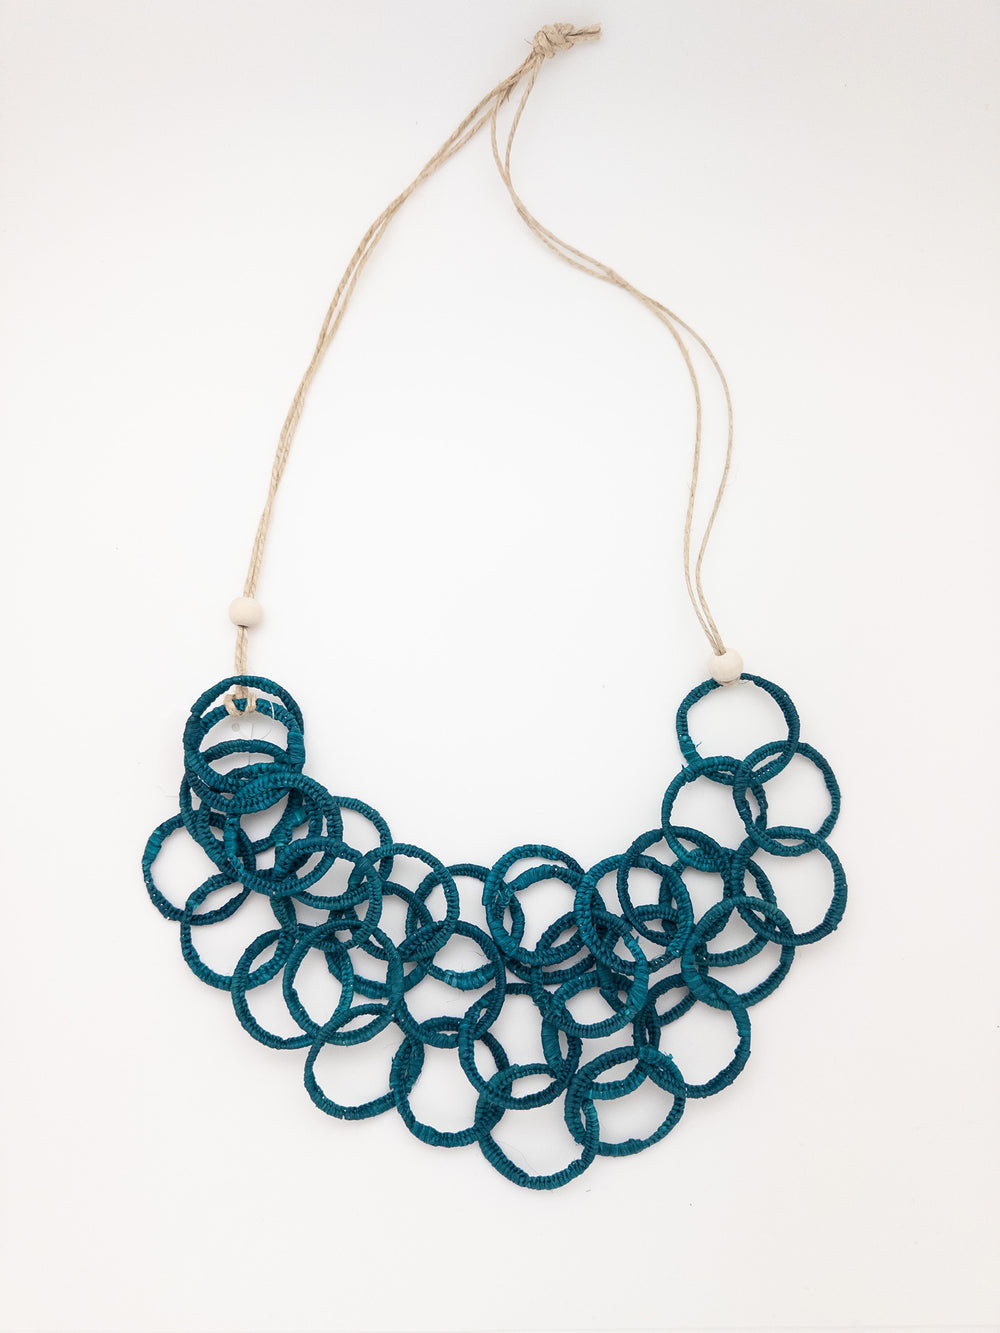 Ayita handmade iraca palm necklace in teal 